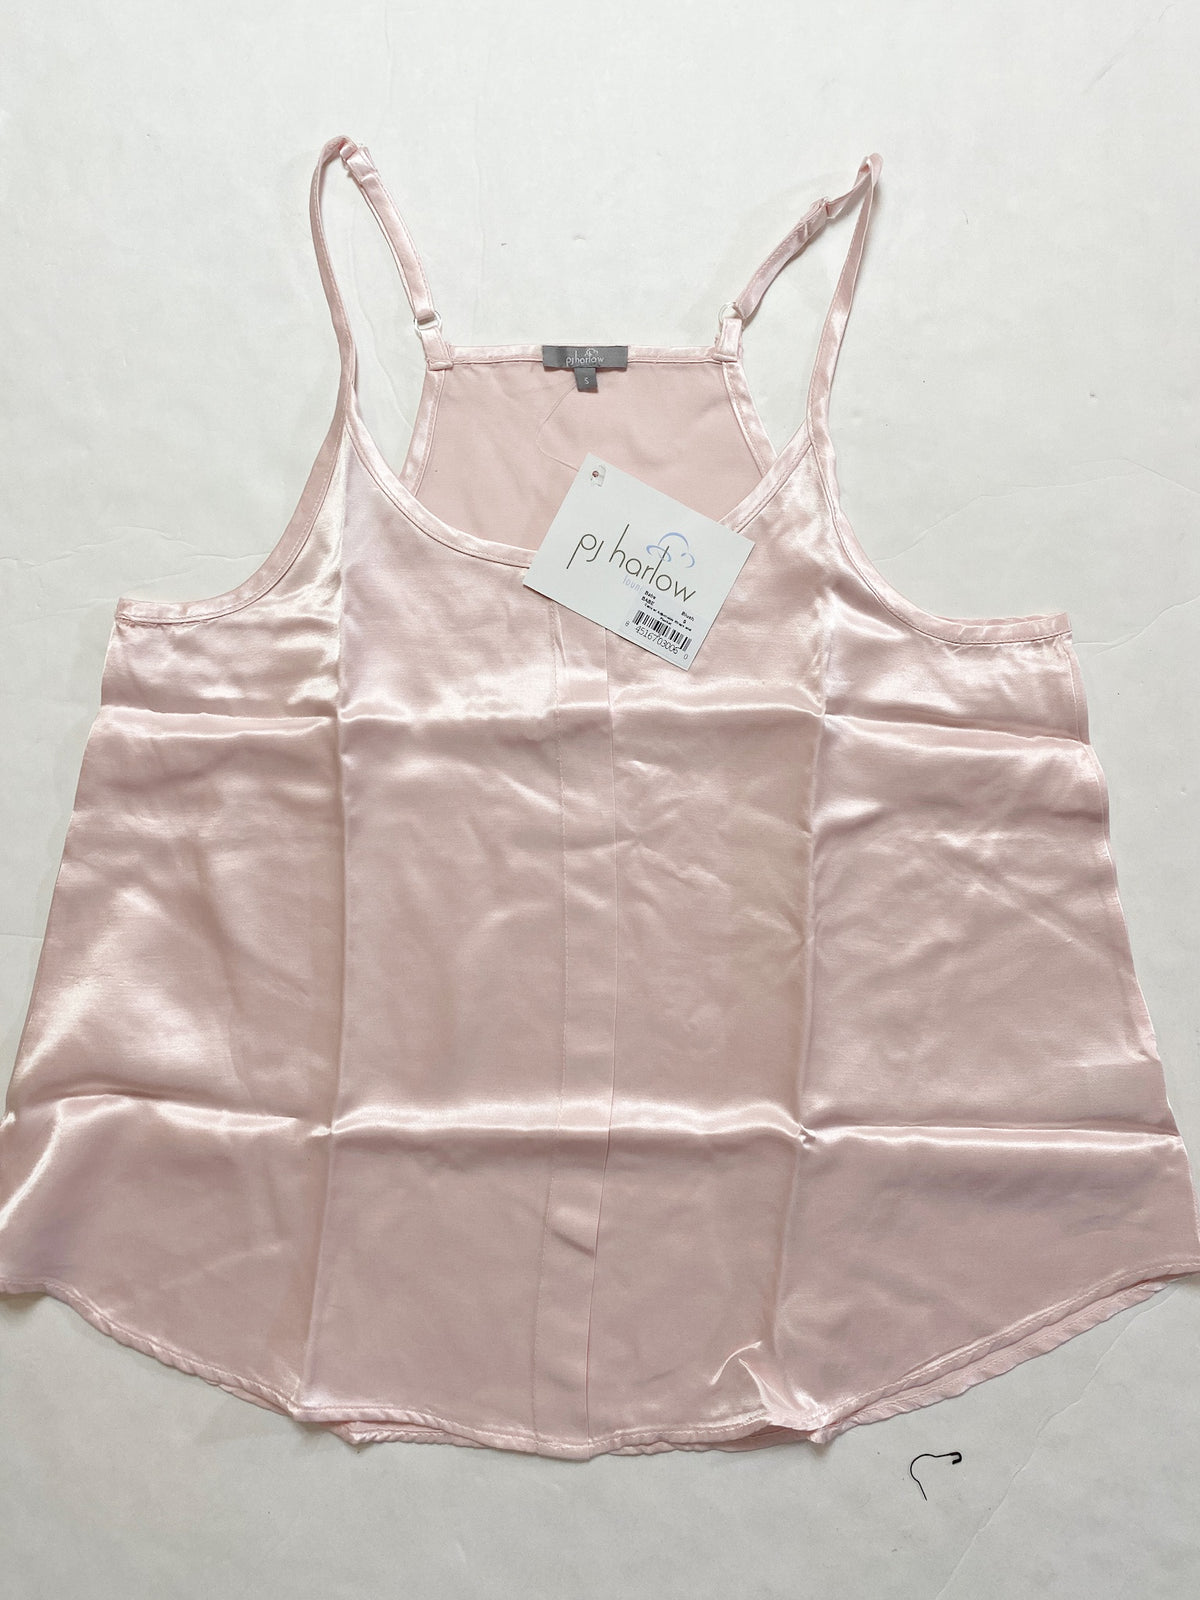 PJ Harlow- Pink Tank- New with Tags!